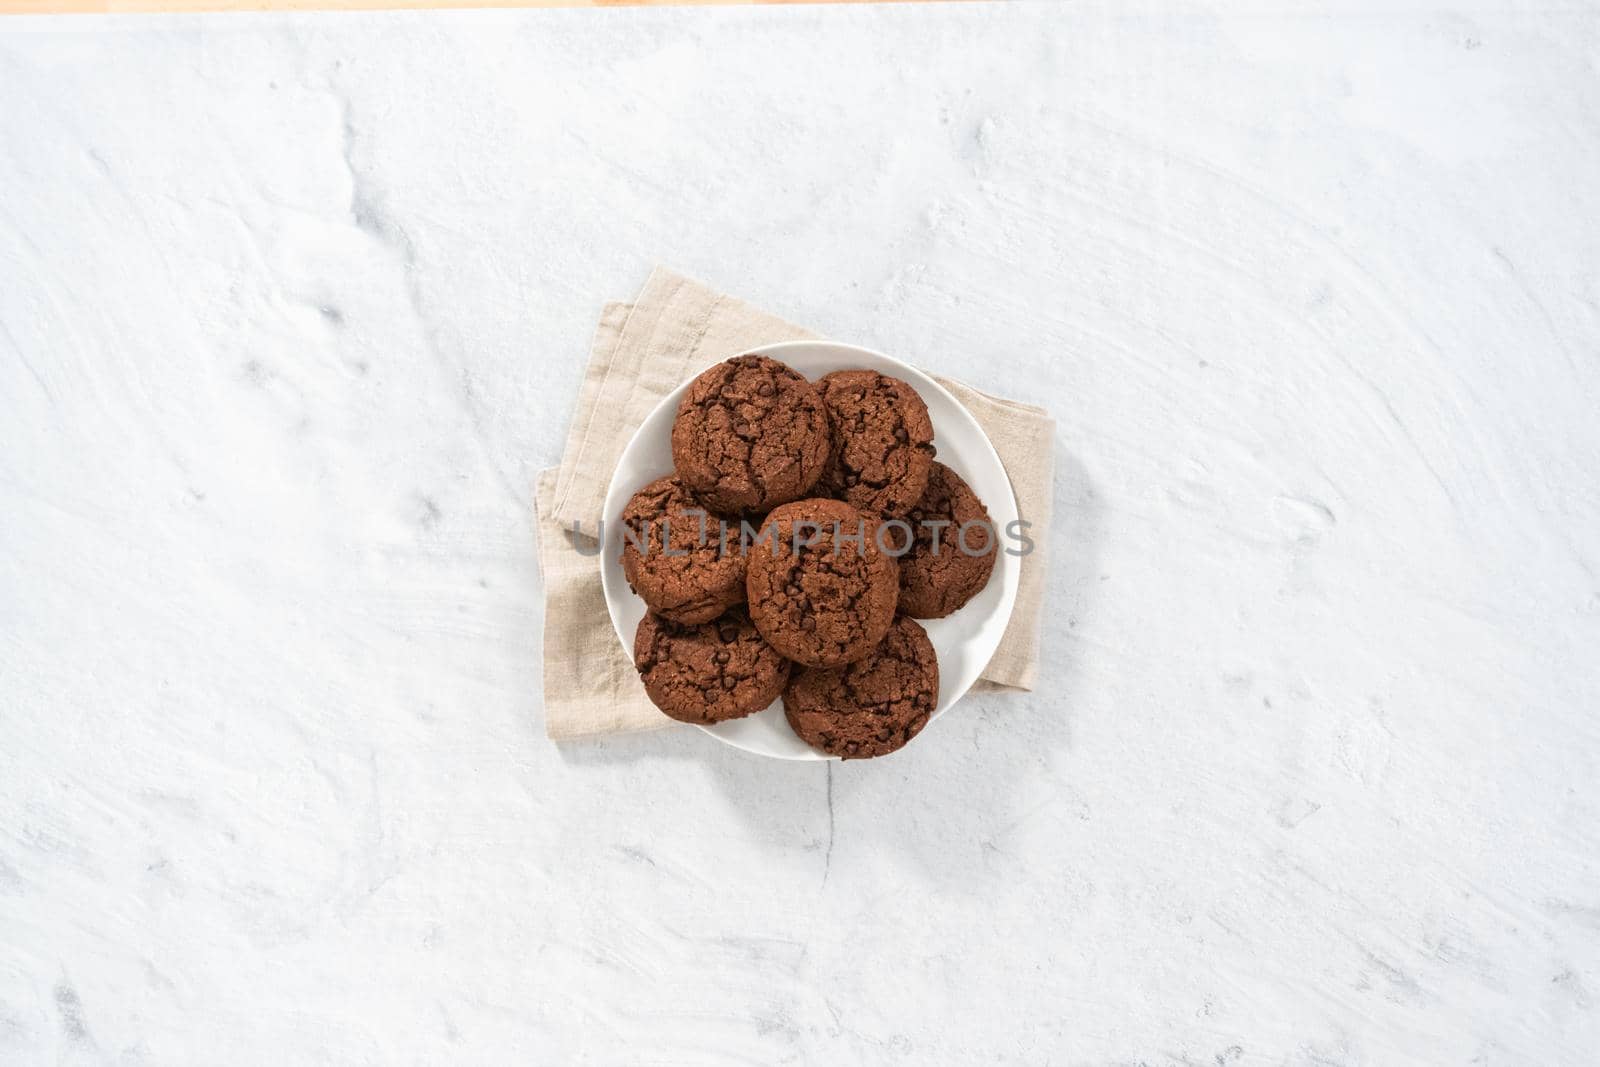 Flat lay. Freshly baked double chocolate chip cookies on a white plate.